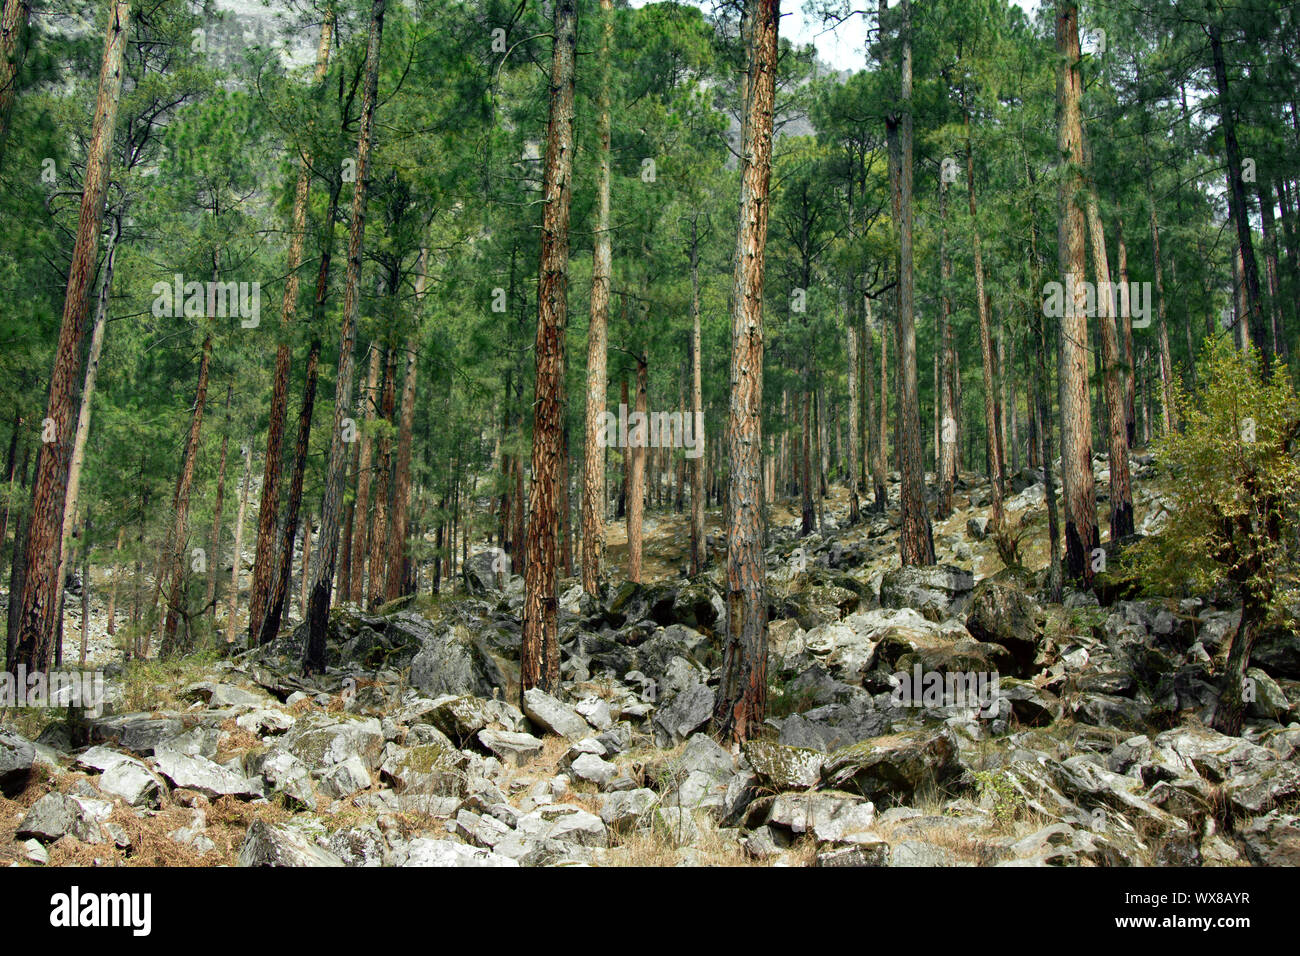 Himalayan pine forests Stock Photo